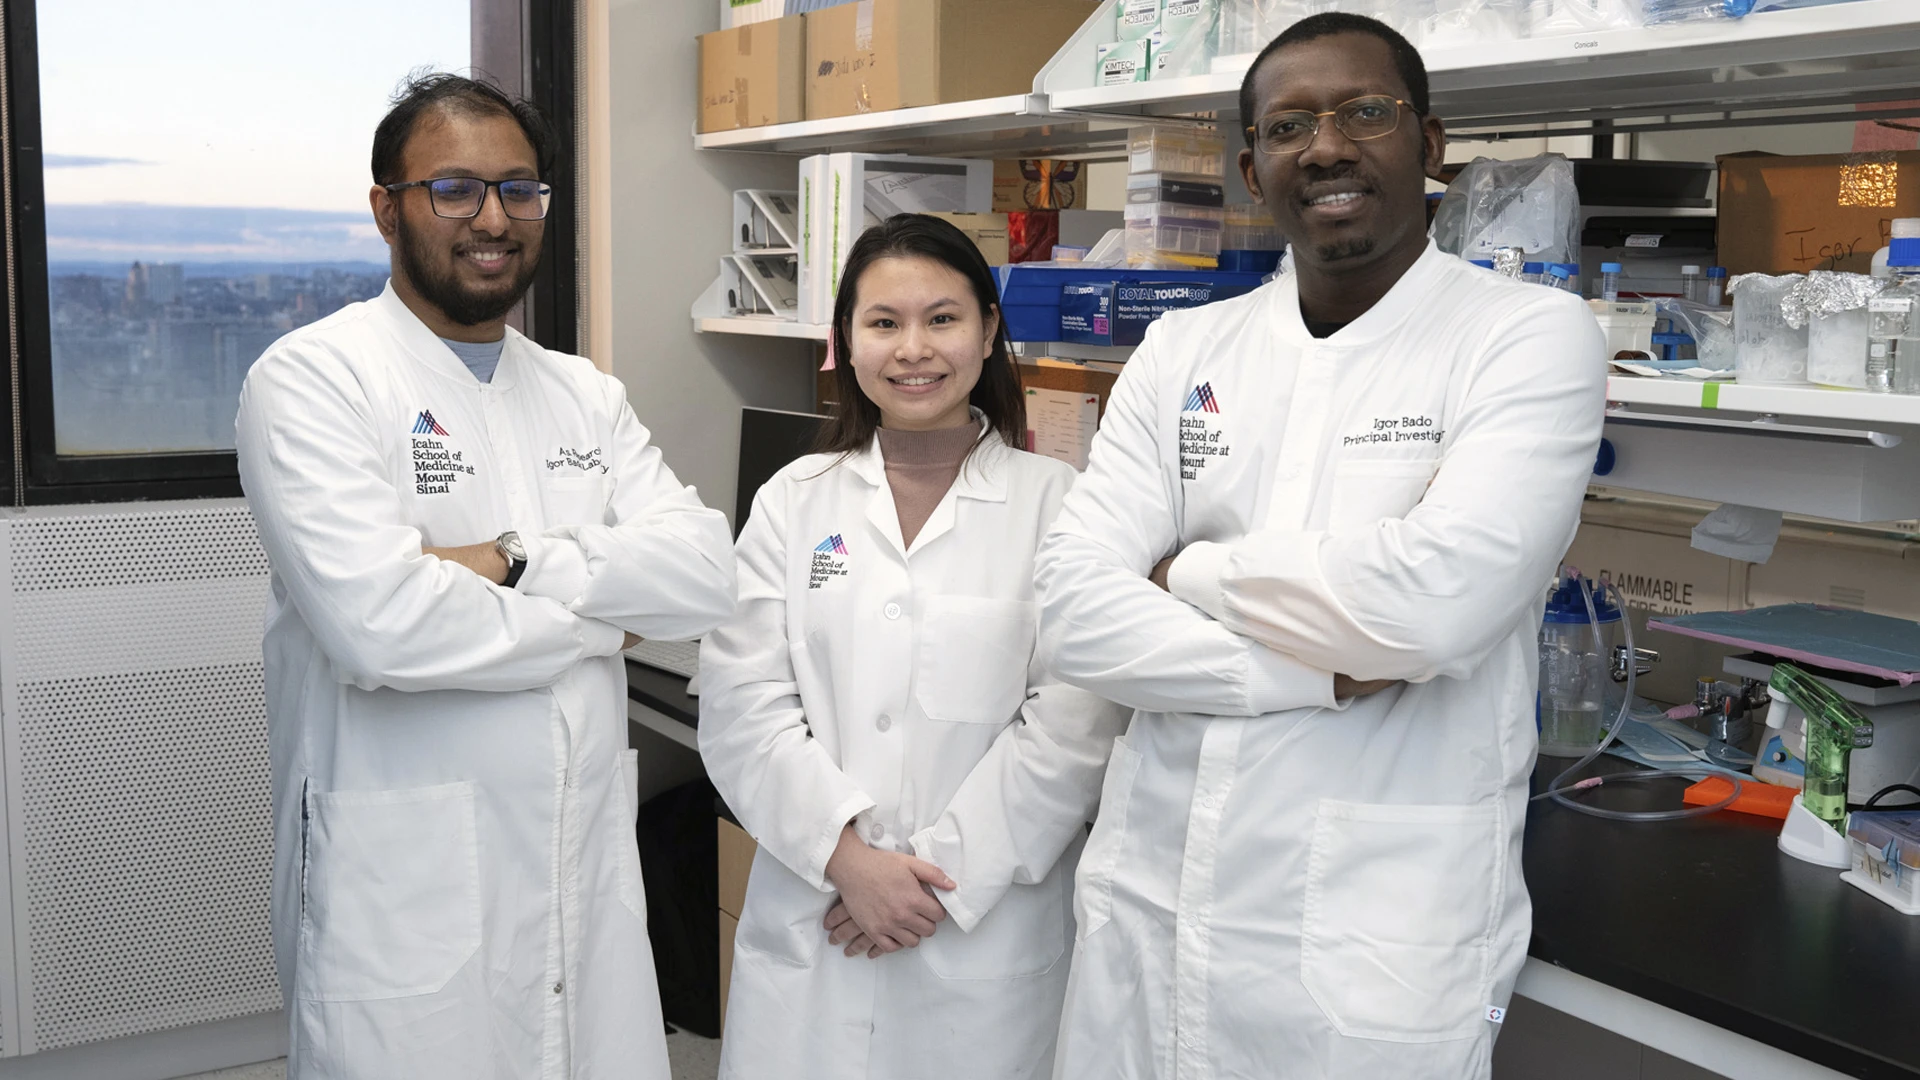 Igor Bado, PhD (right), and his lab members Rahat Alam, BS (left), and Chau Duong, BS (center). Dr. Bado has secured a grant to explore the role of fibroblast growth factor 2 in the bone microenvironment, which has an impact on breast cancer metastasis.